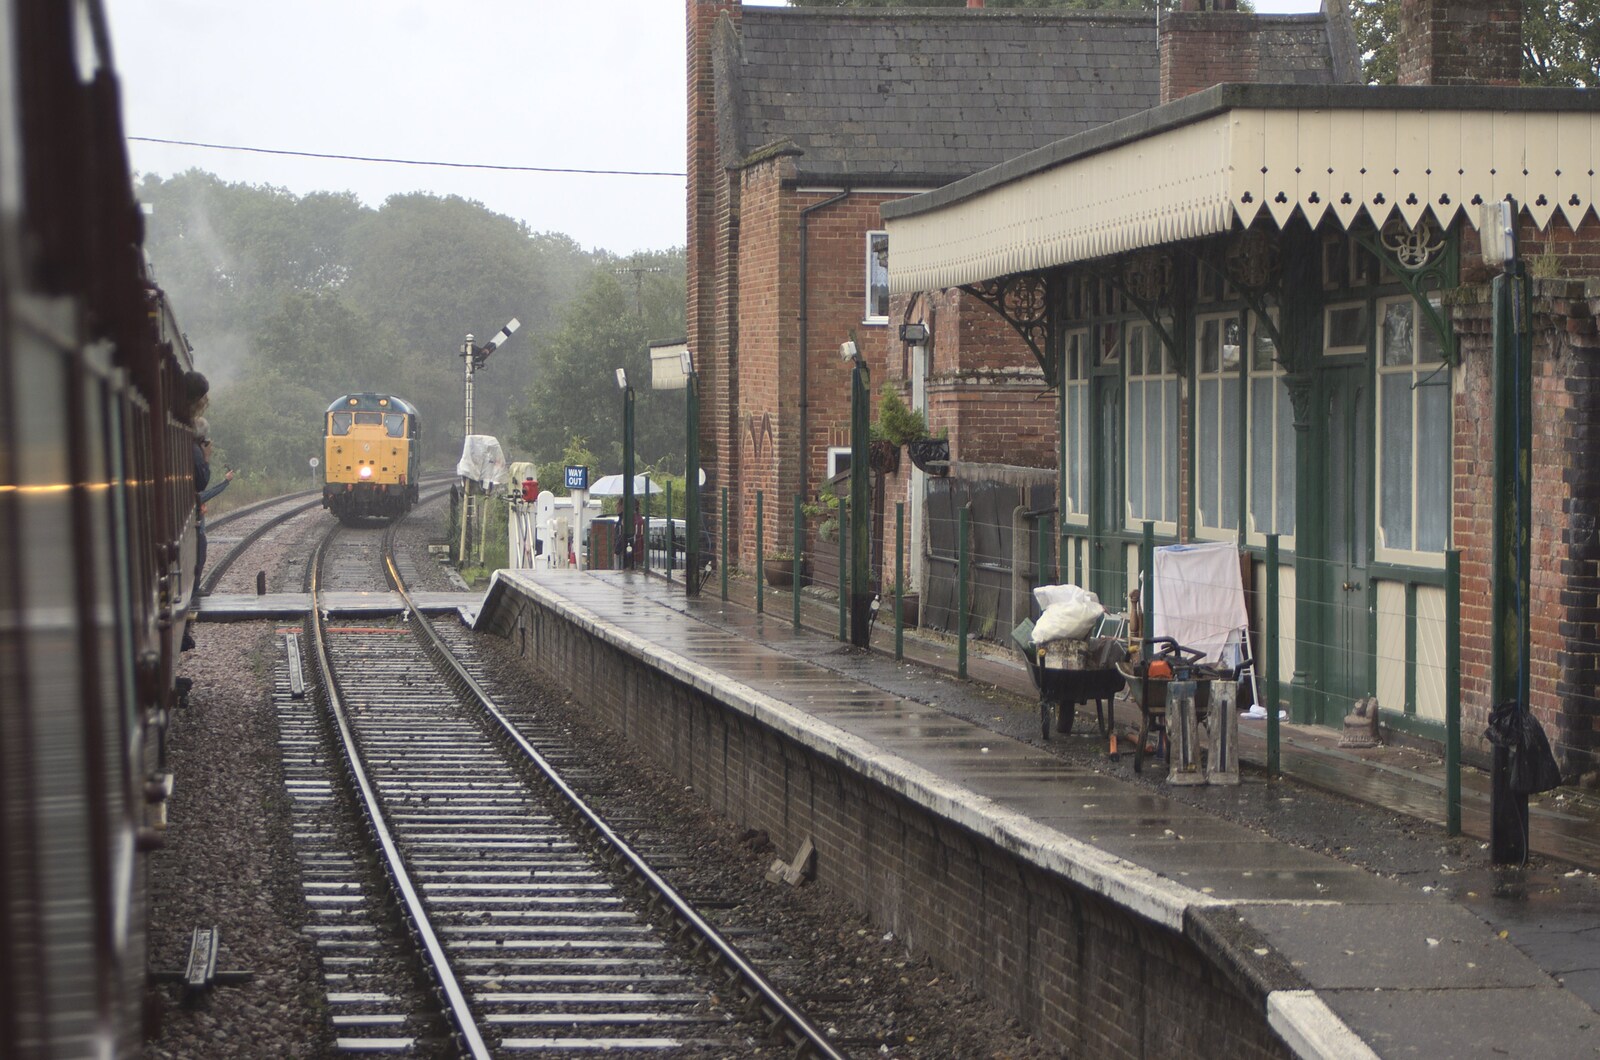 Camping with Trains, Yaxham, Norfolk - 29th August 2010: A crossover with Class 31 31438